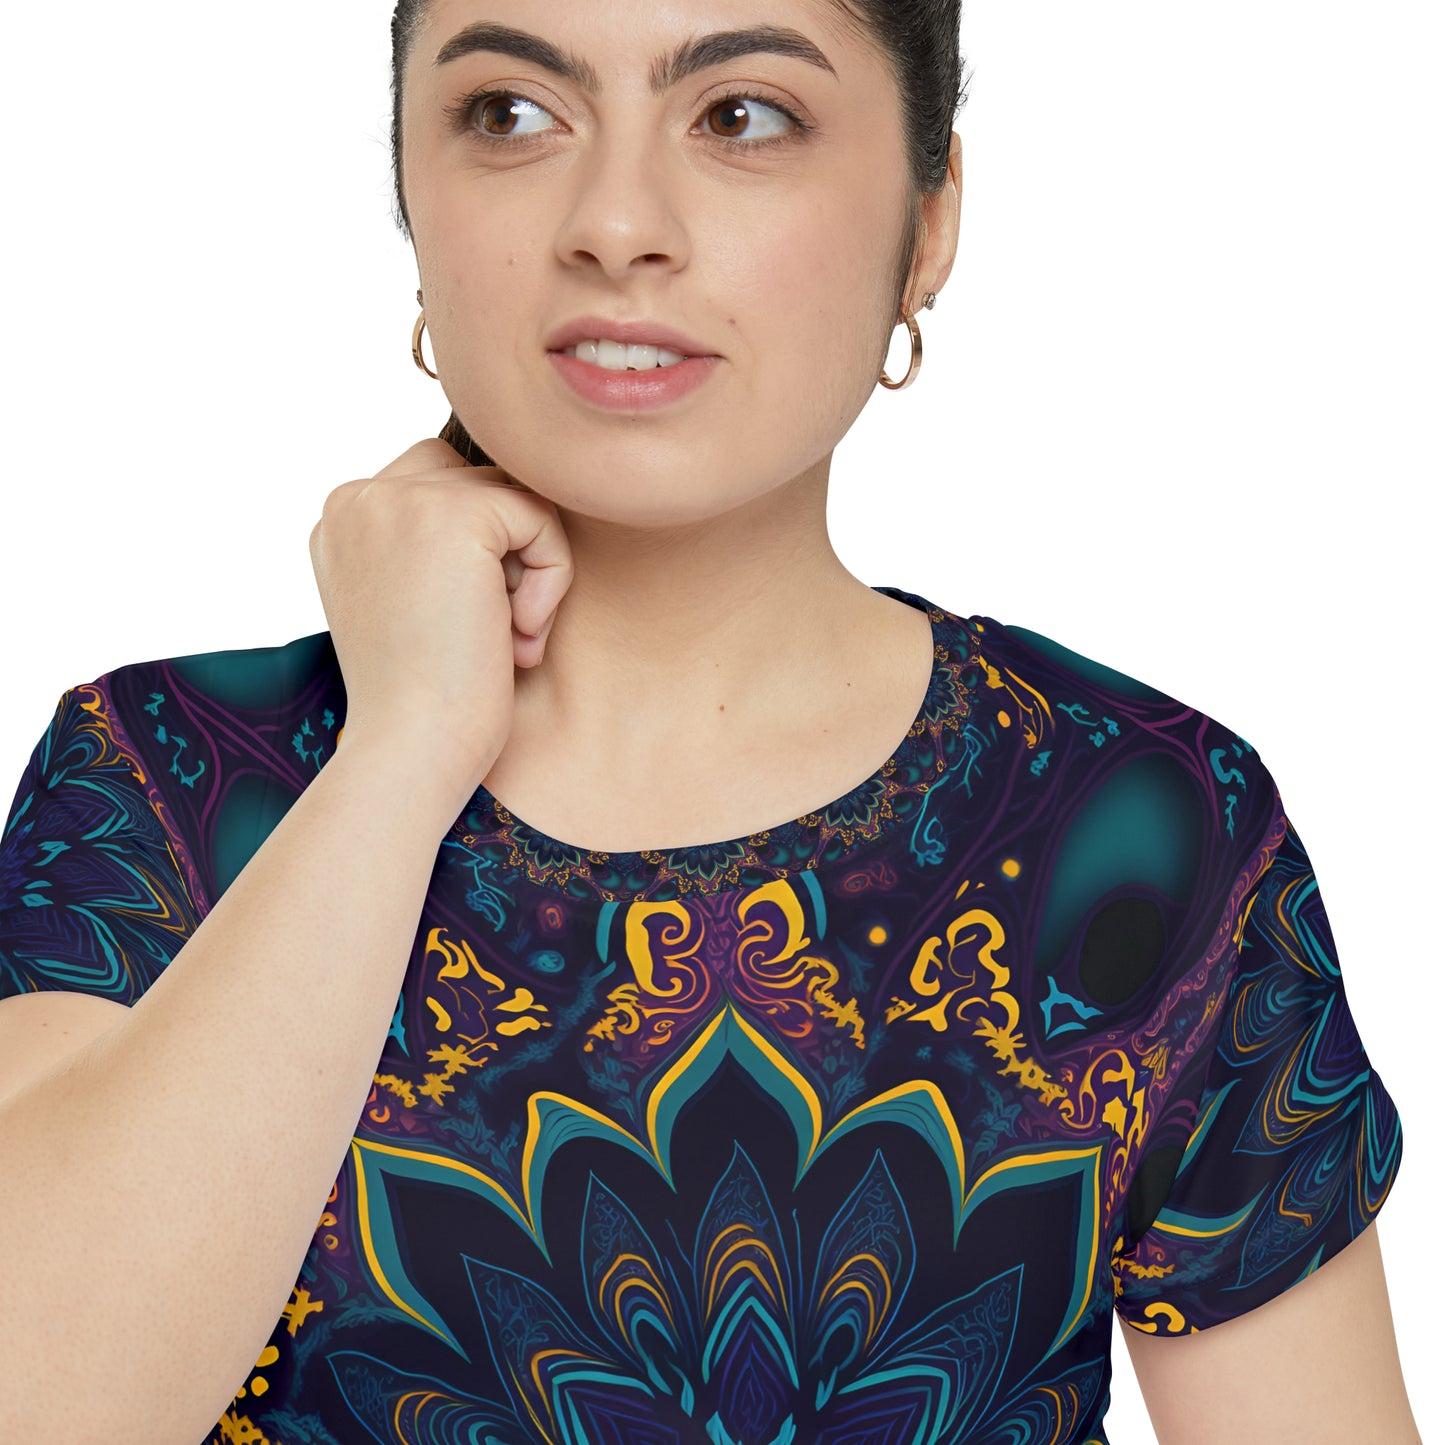 Blooming Geometry: The Floral Fractal - Women's Short Sleeve Shirt